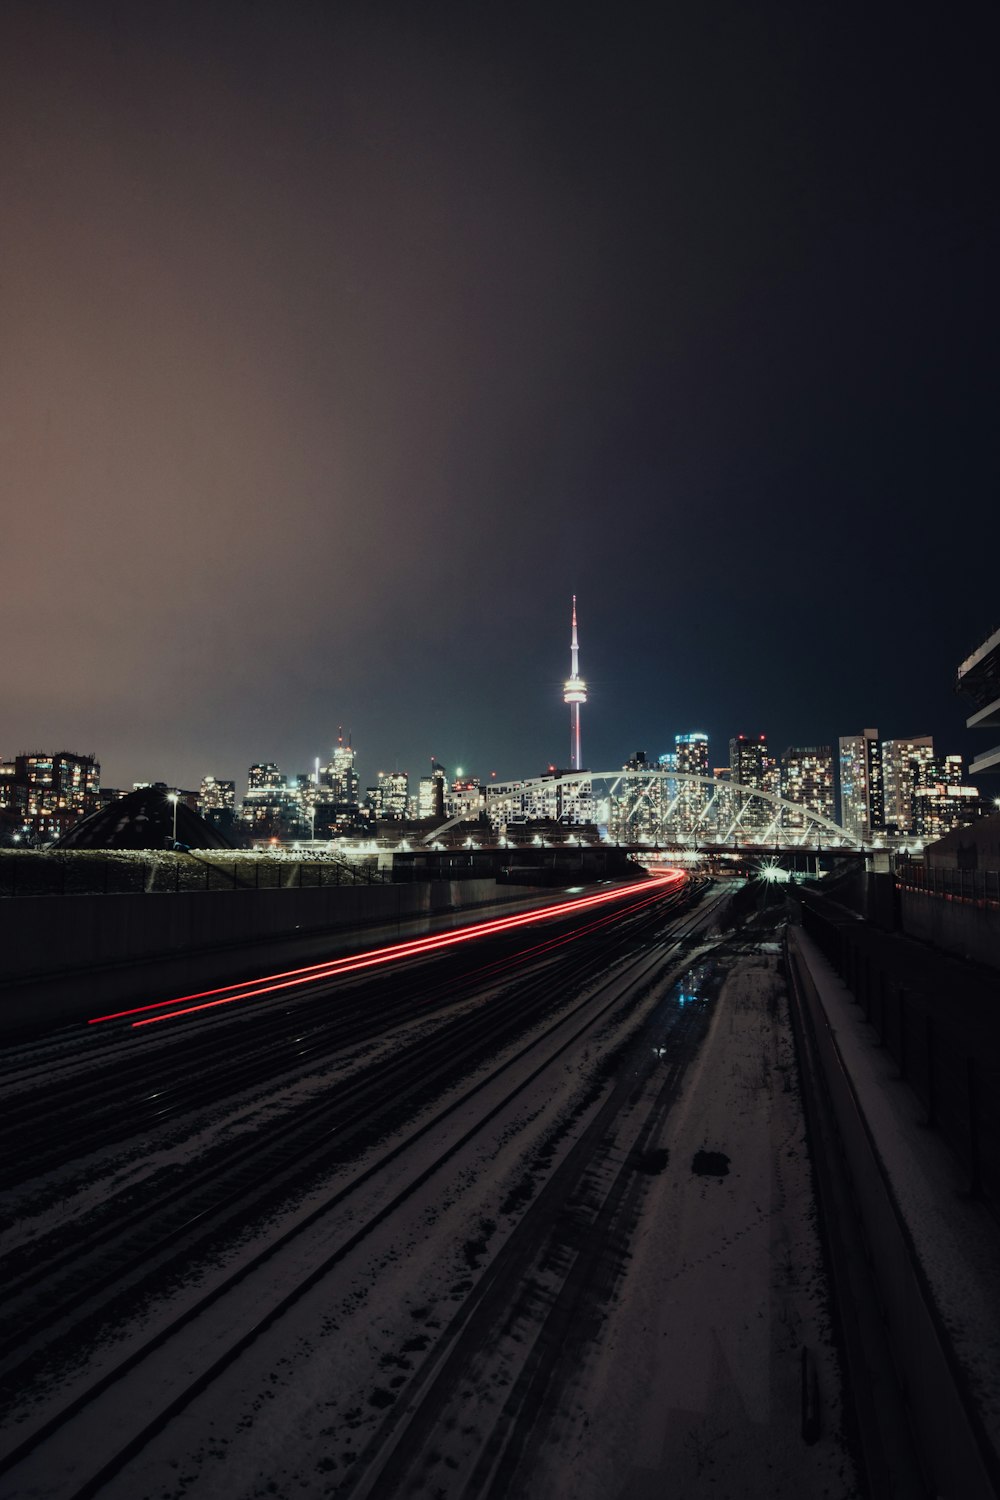 time lapse photography of city during night time